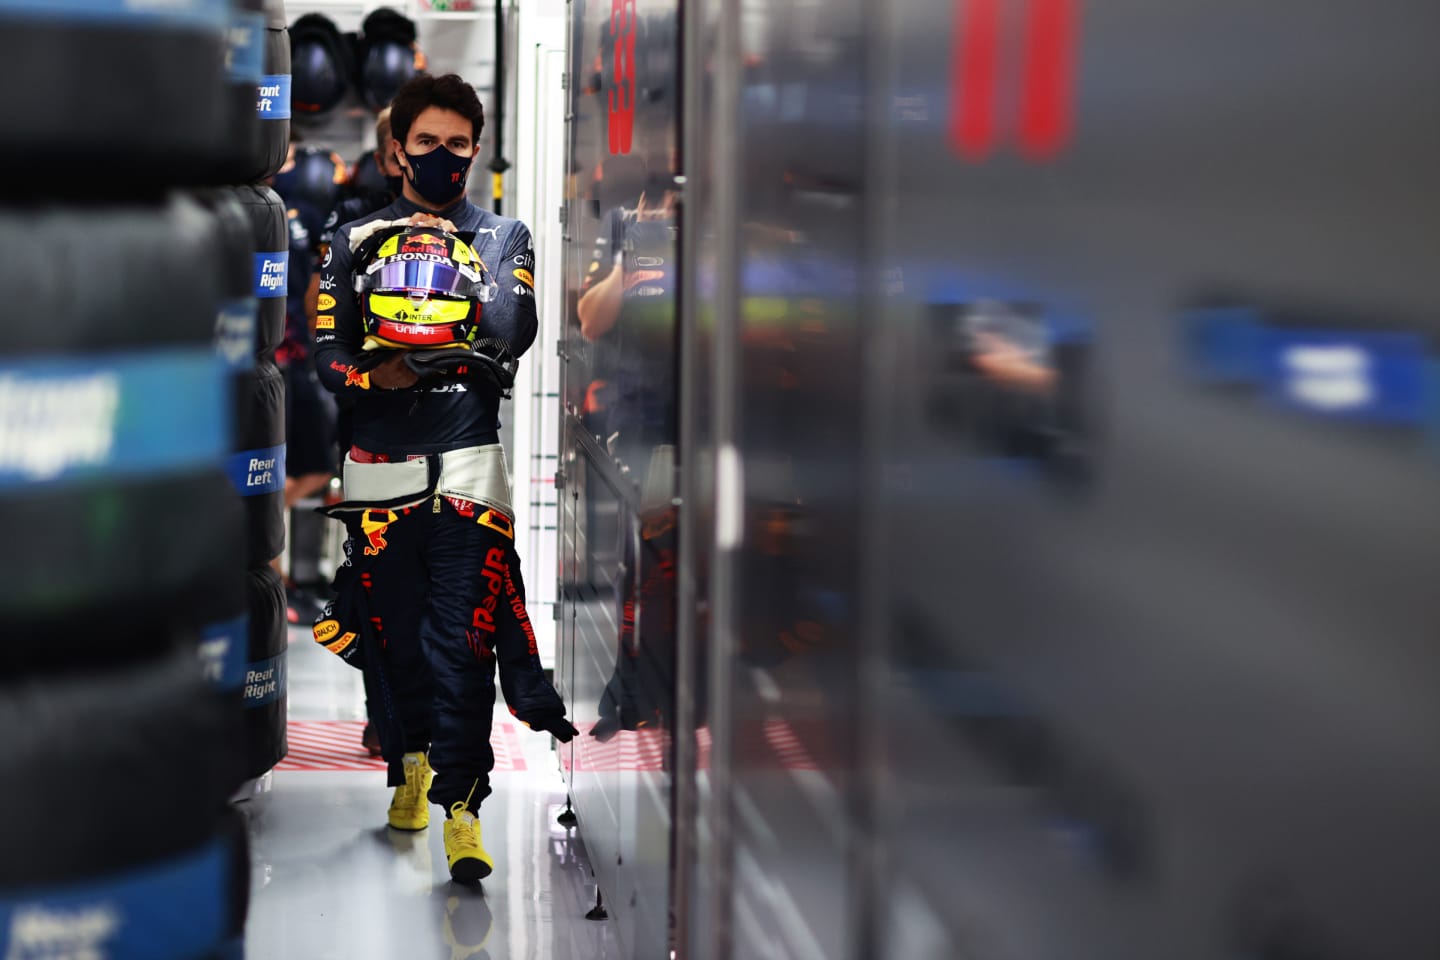 LE CASTELLET, FRANCE - JUNE 19: Sergio Perez of Mexico and Red Bull Racing walks in the garage during qualifying ahead of the F1 Grand Prix of France at Circuit Paul Ricard on June 19, 2021 in Le Castellet, France. (Photo by Mark Thompson/Getty Images)